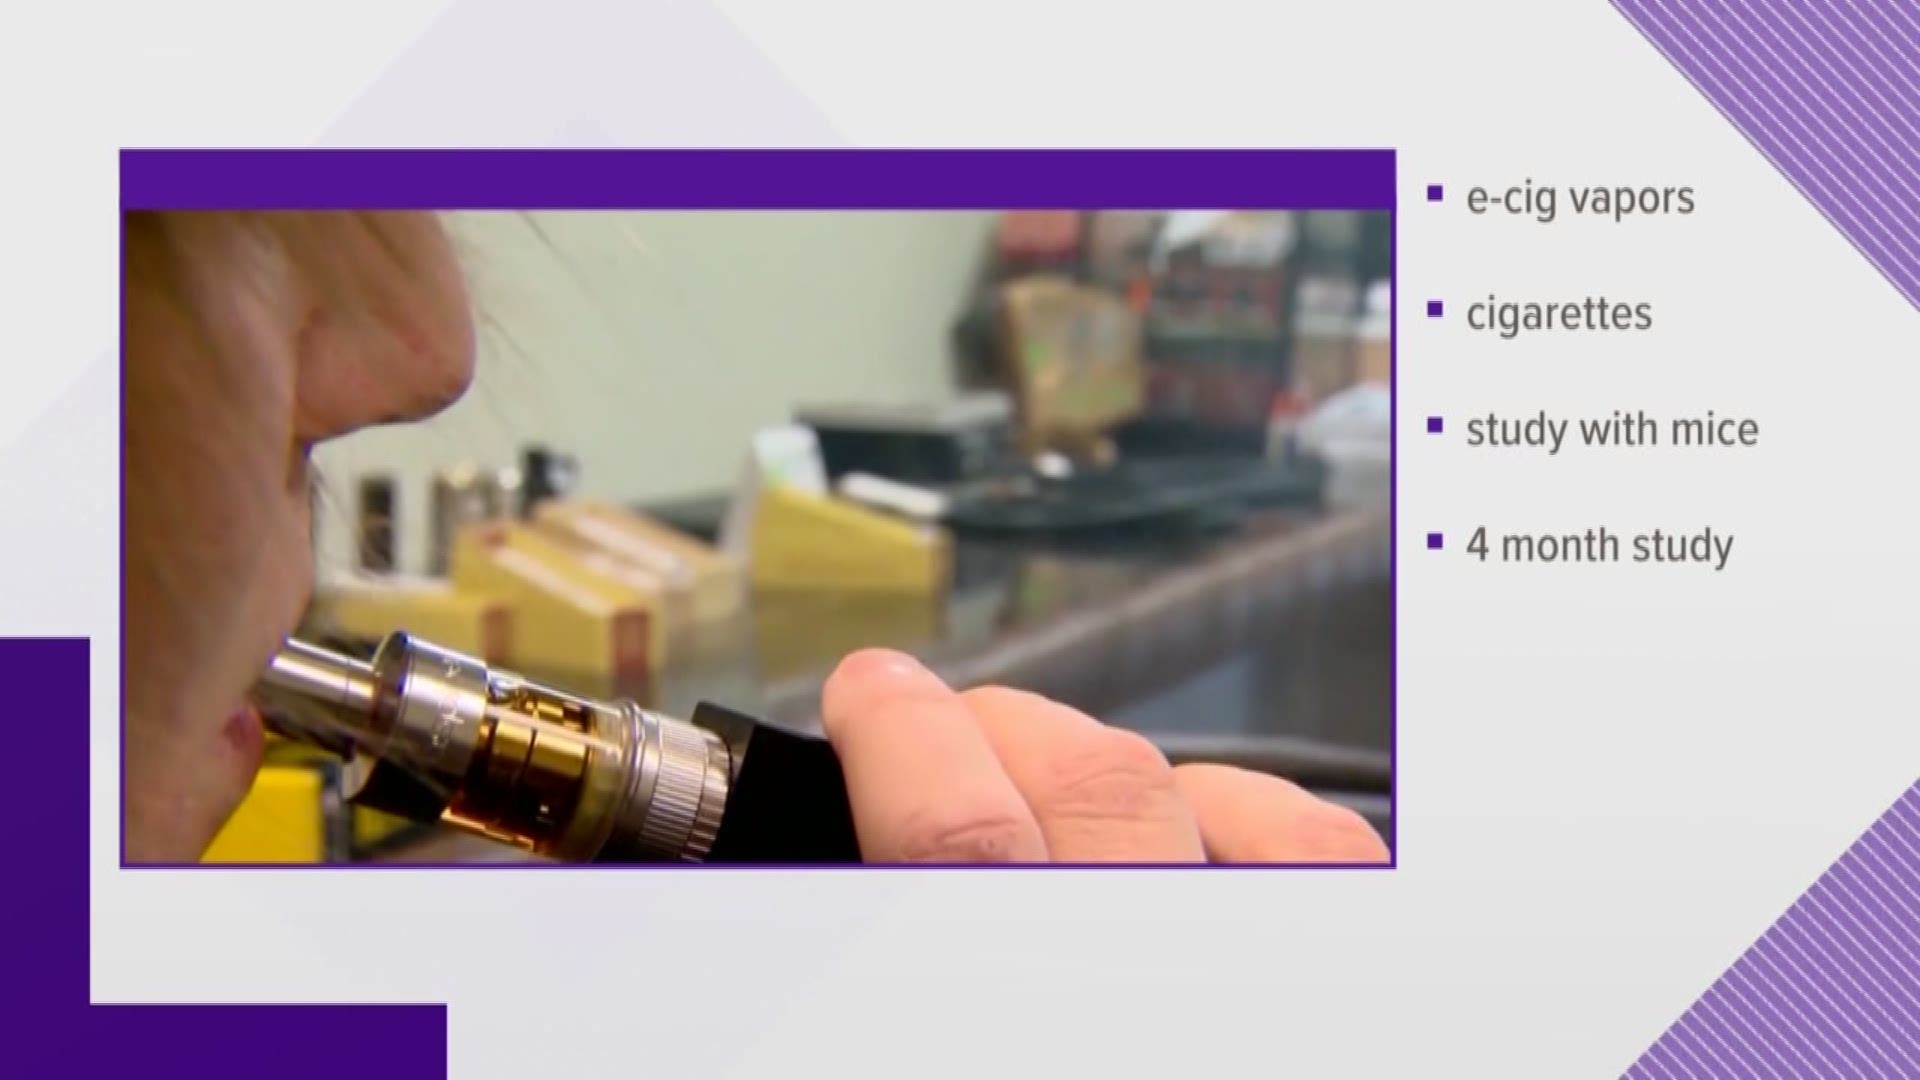 Doctors in Houston just wrapped up a study that found vaping leads to an abnormal build of fat in the lungs.